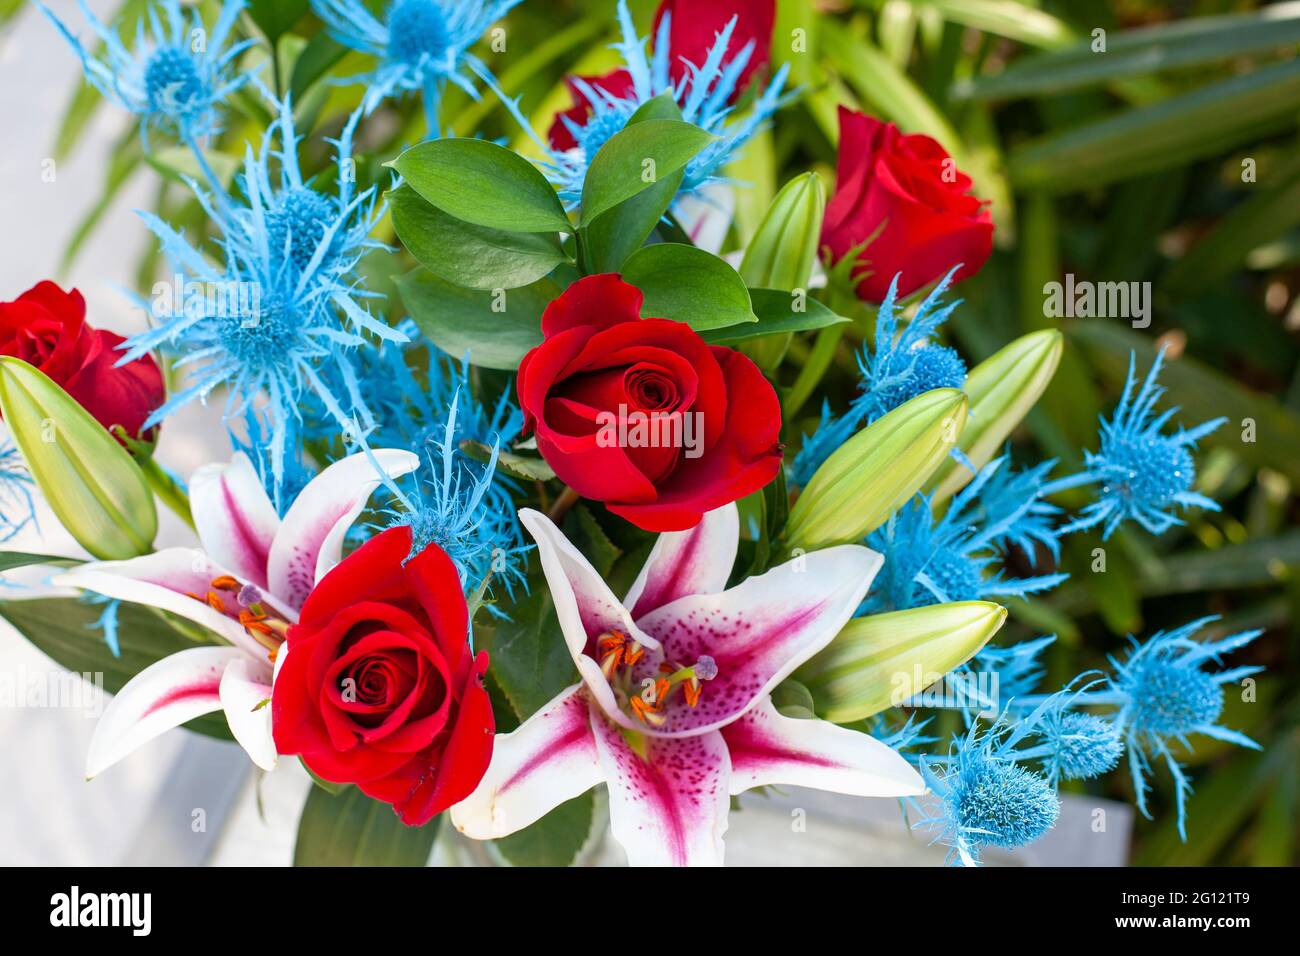 A Close-Up of  Two White Tiger Lily with Deep Violet Veins in the Petals with Red Roses and Alpine Sea Holly. Stock Photo